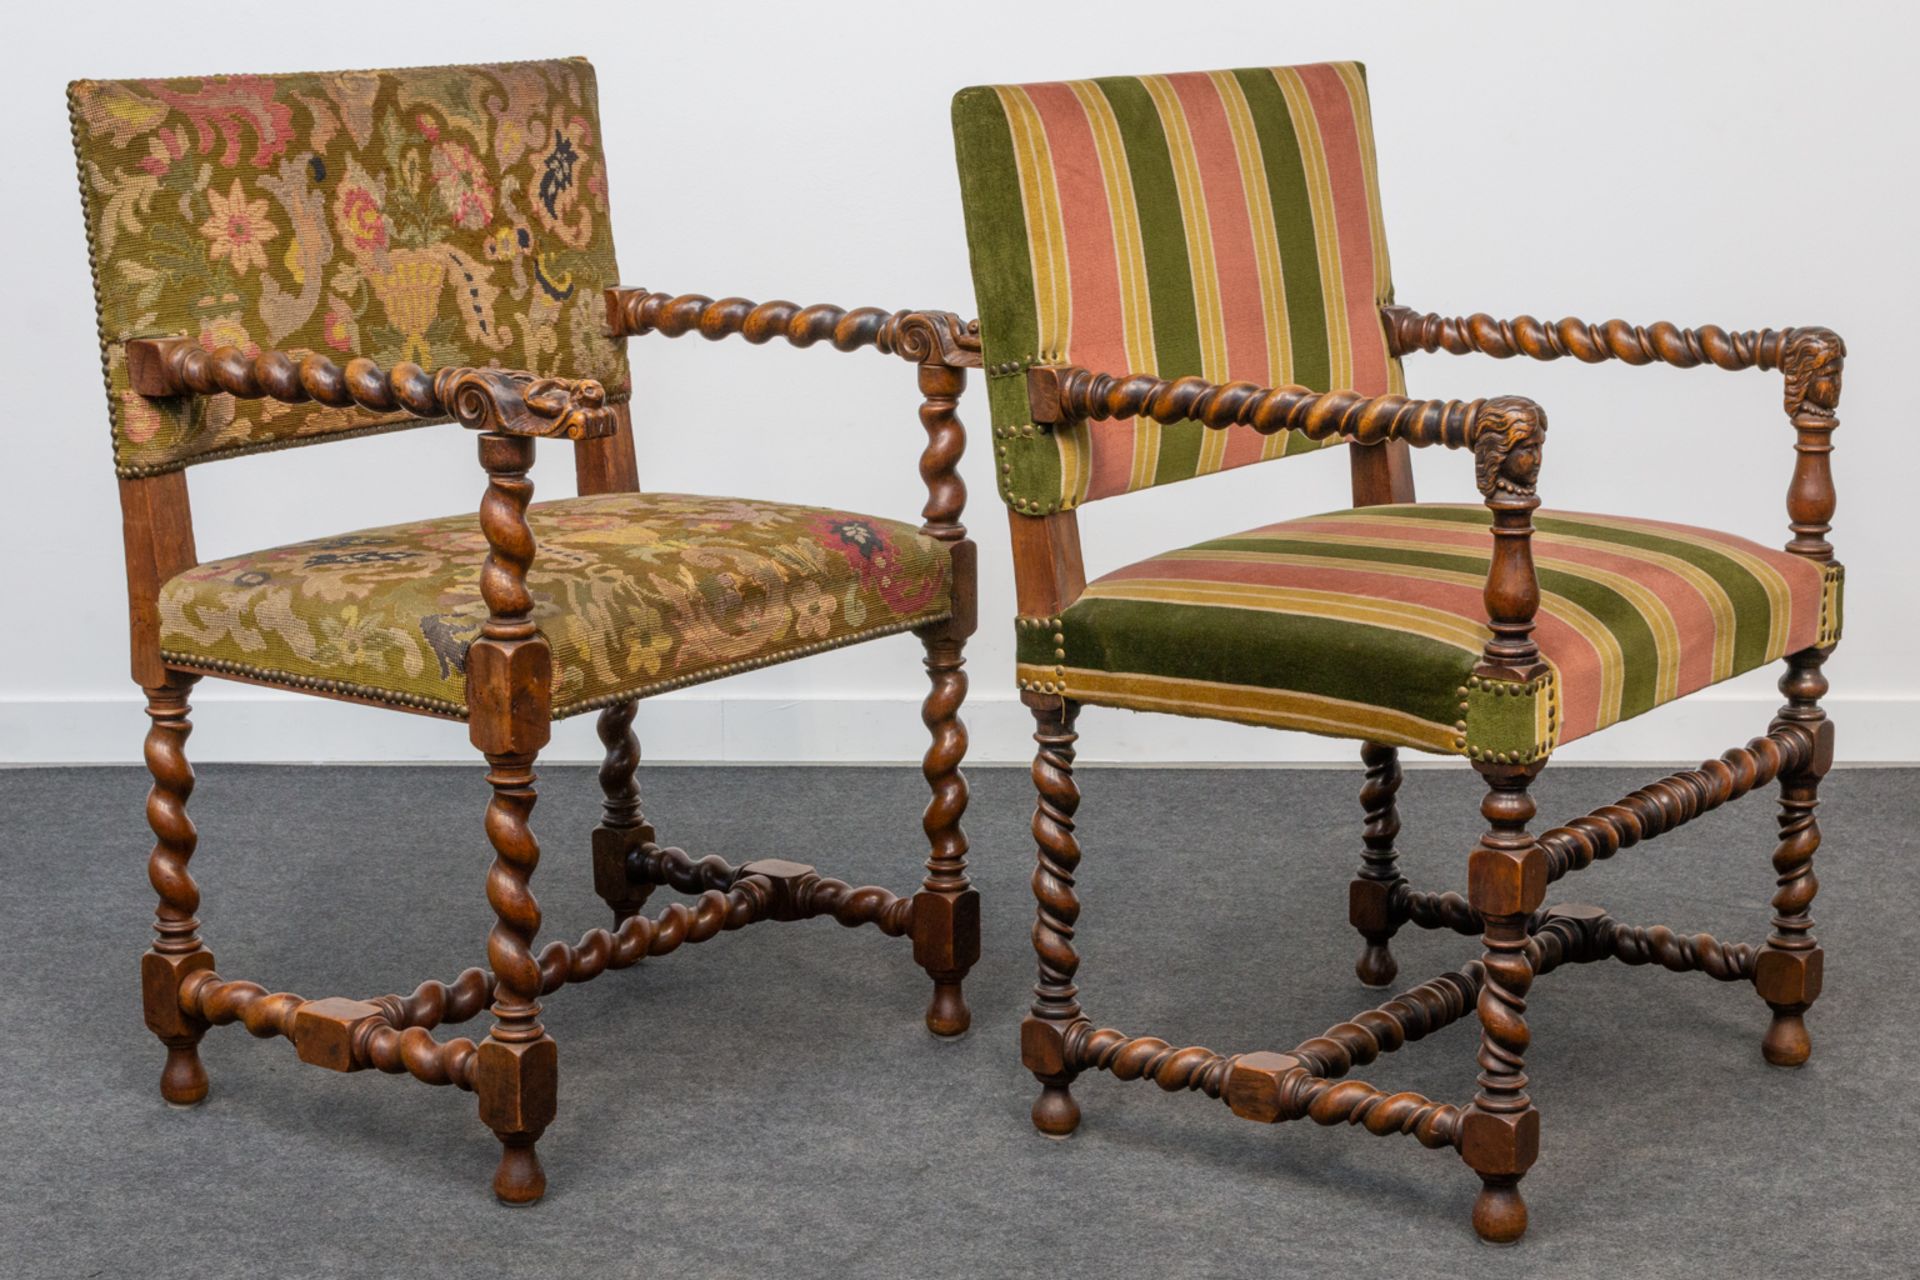 A collection of 2 castle chairs with sculptured handles. 19th century. (92 x 63 x 54 cm) - Bild 16 aus 18